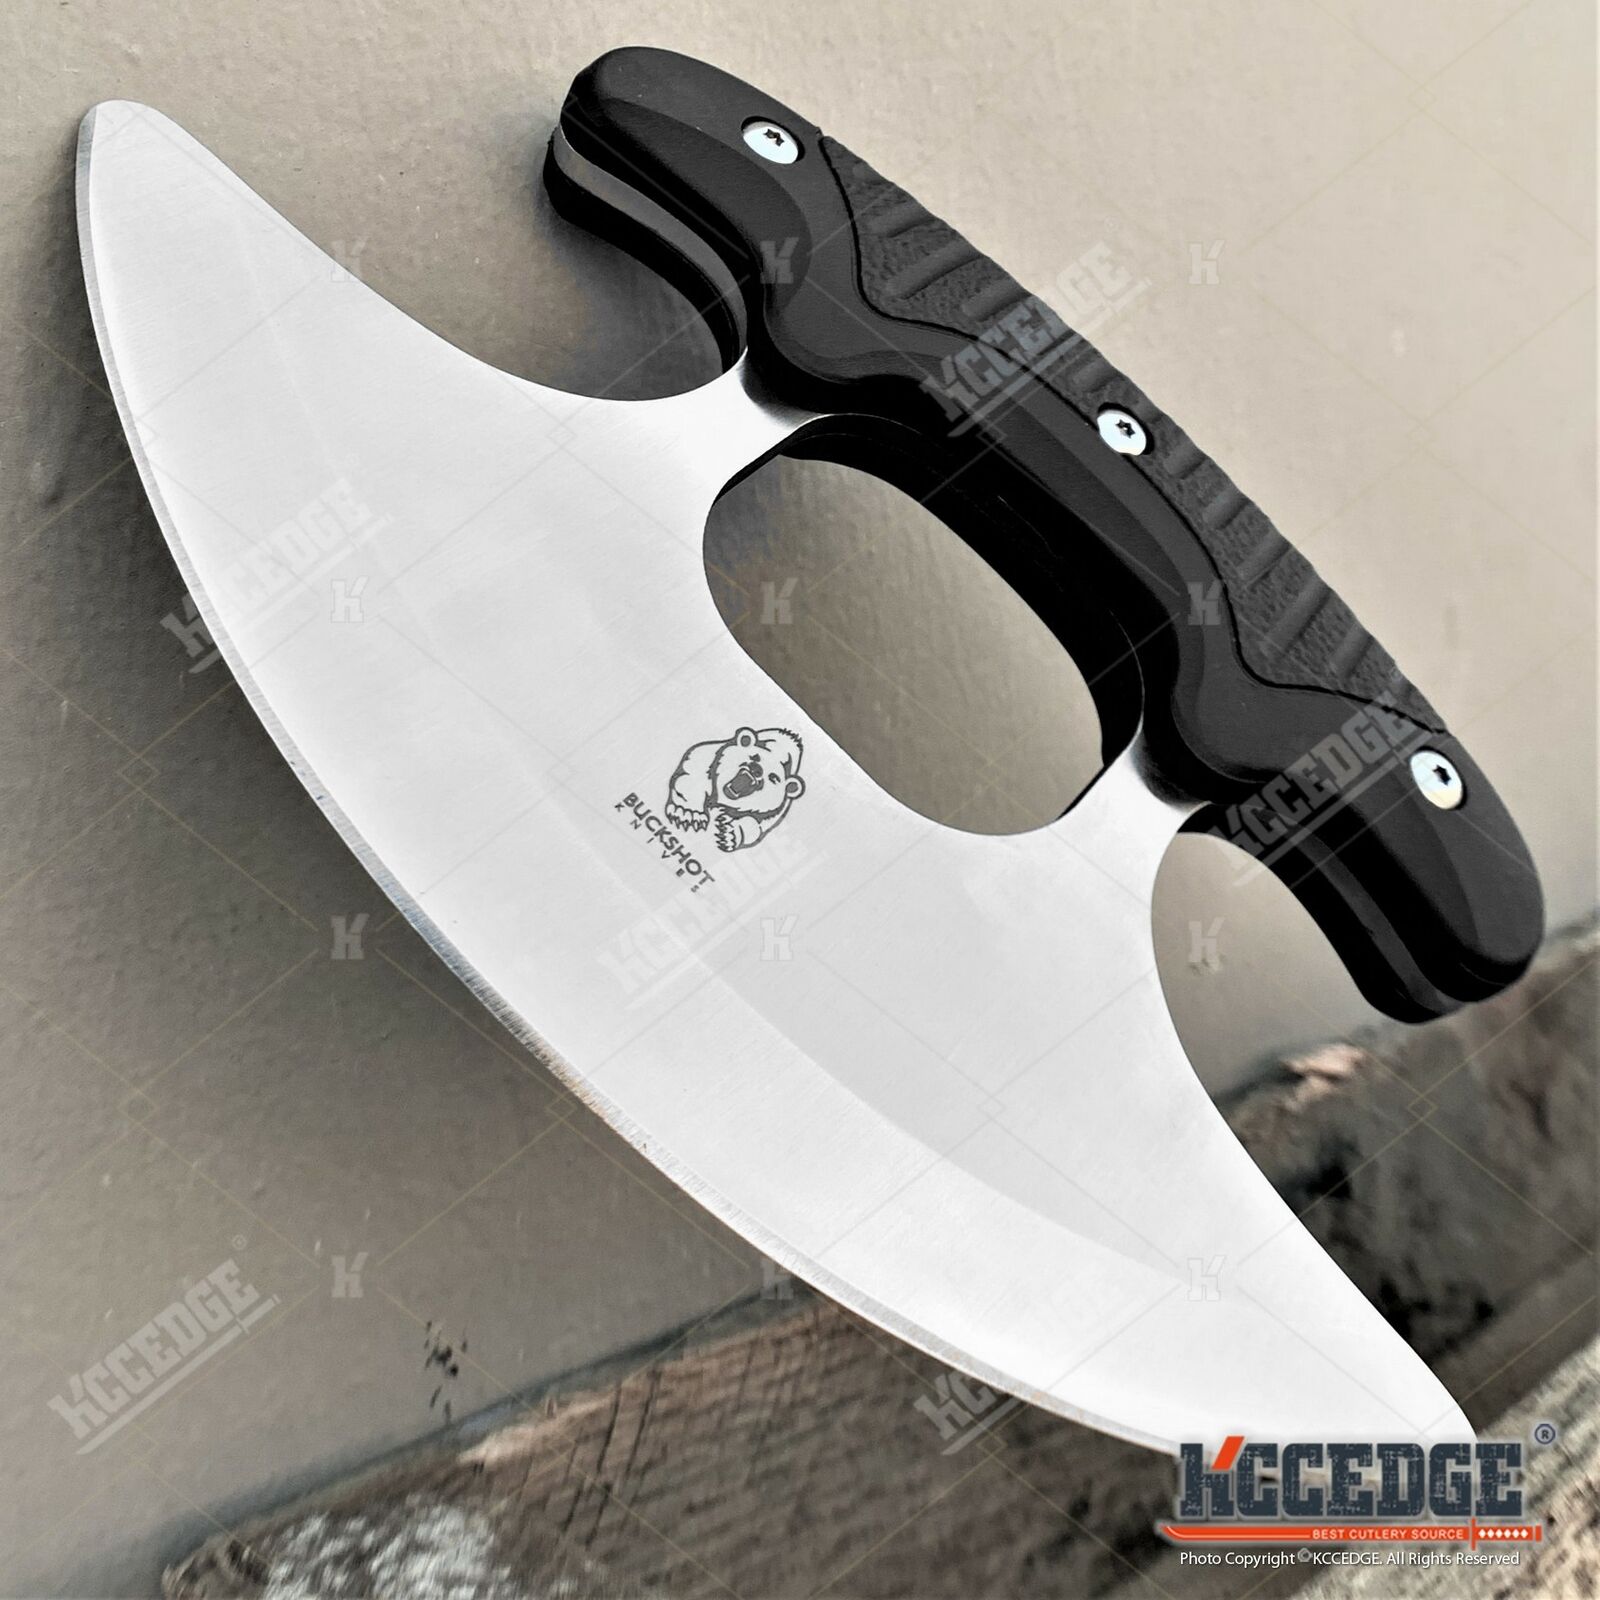 6.75 INCH FULL TANG ULU FIXED BLADE KNIFE CHEF KNIFE TACTICAL KNIFE COOKING